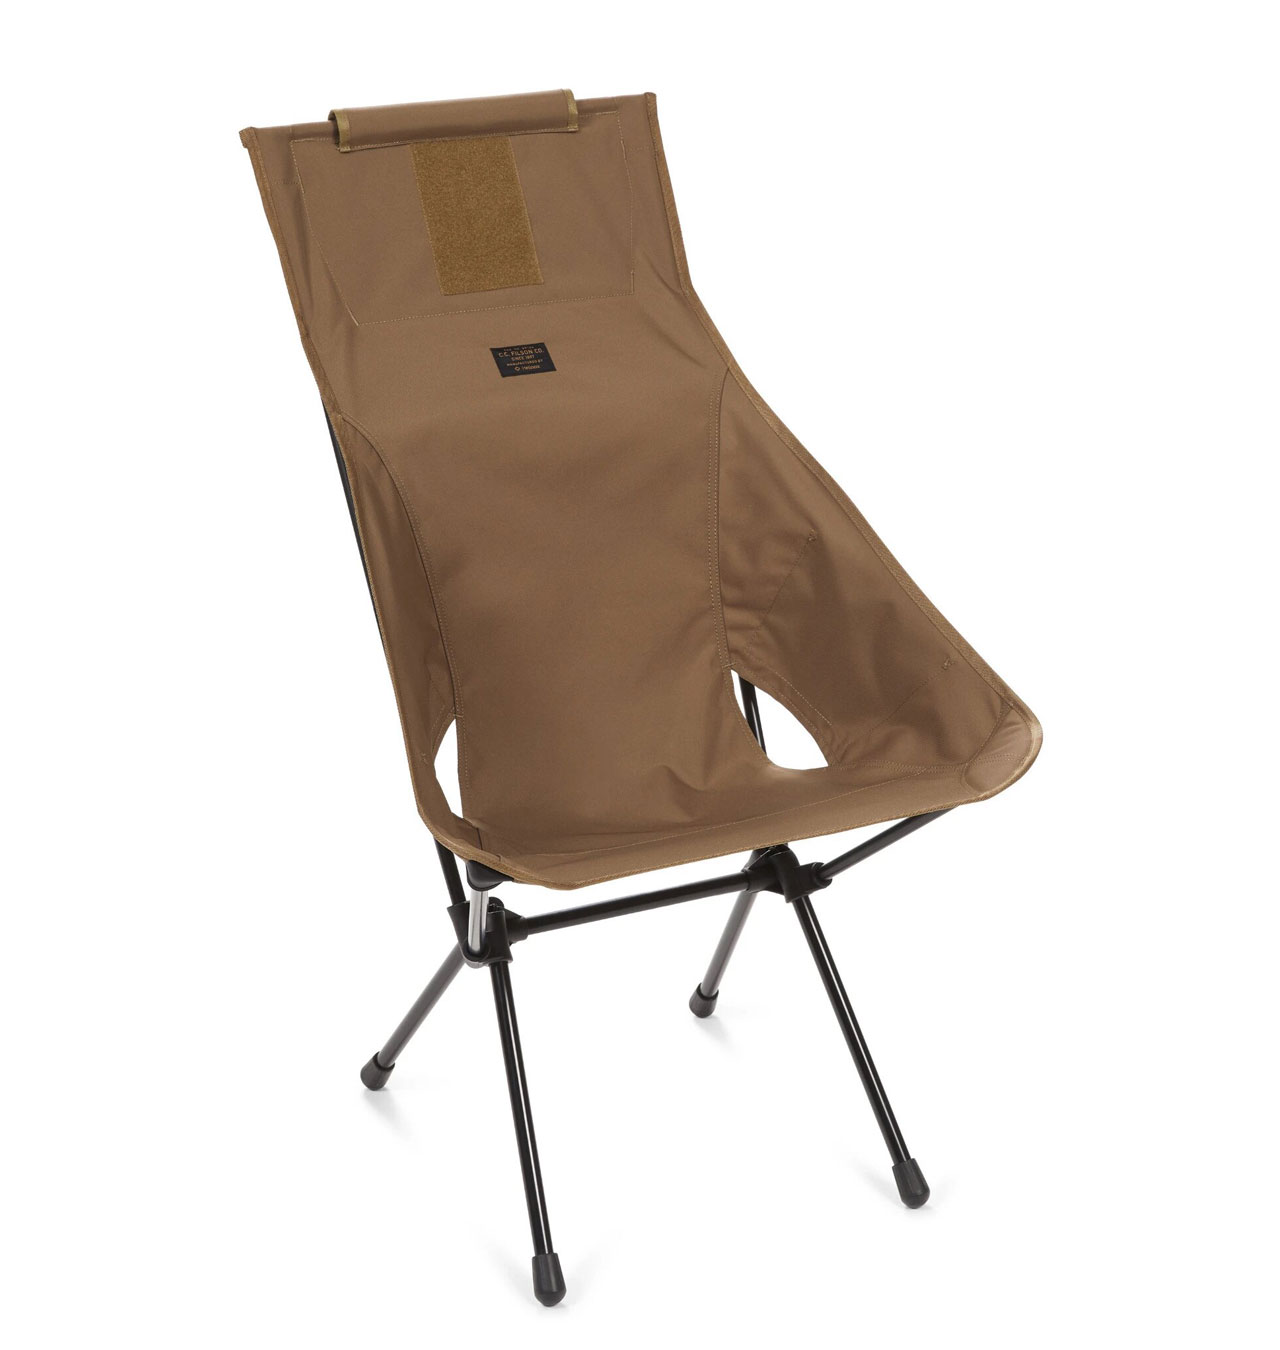 Filson x Helinox - Solid Tactical Sunset Chair - Coyote Tan